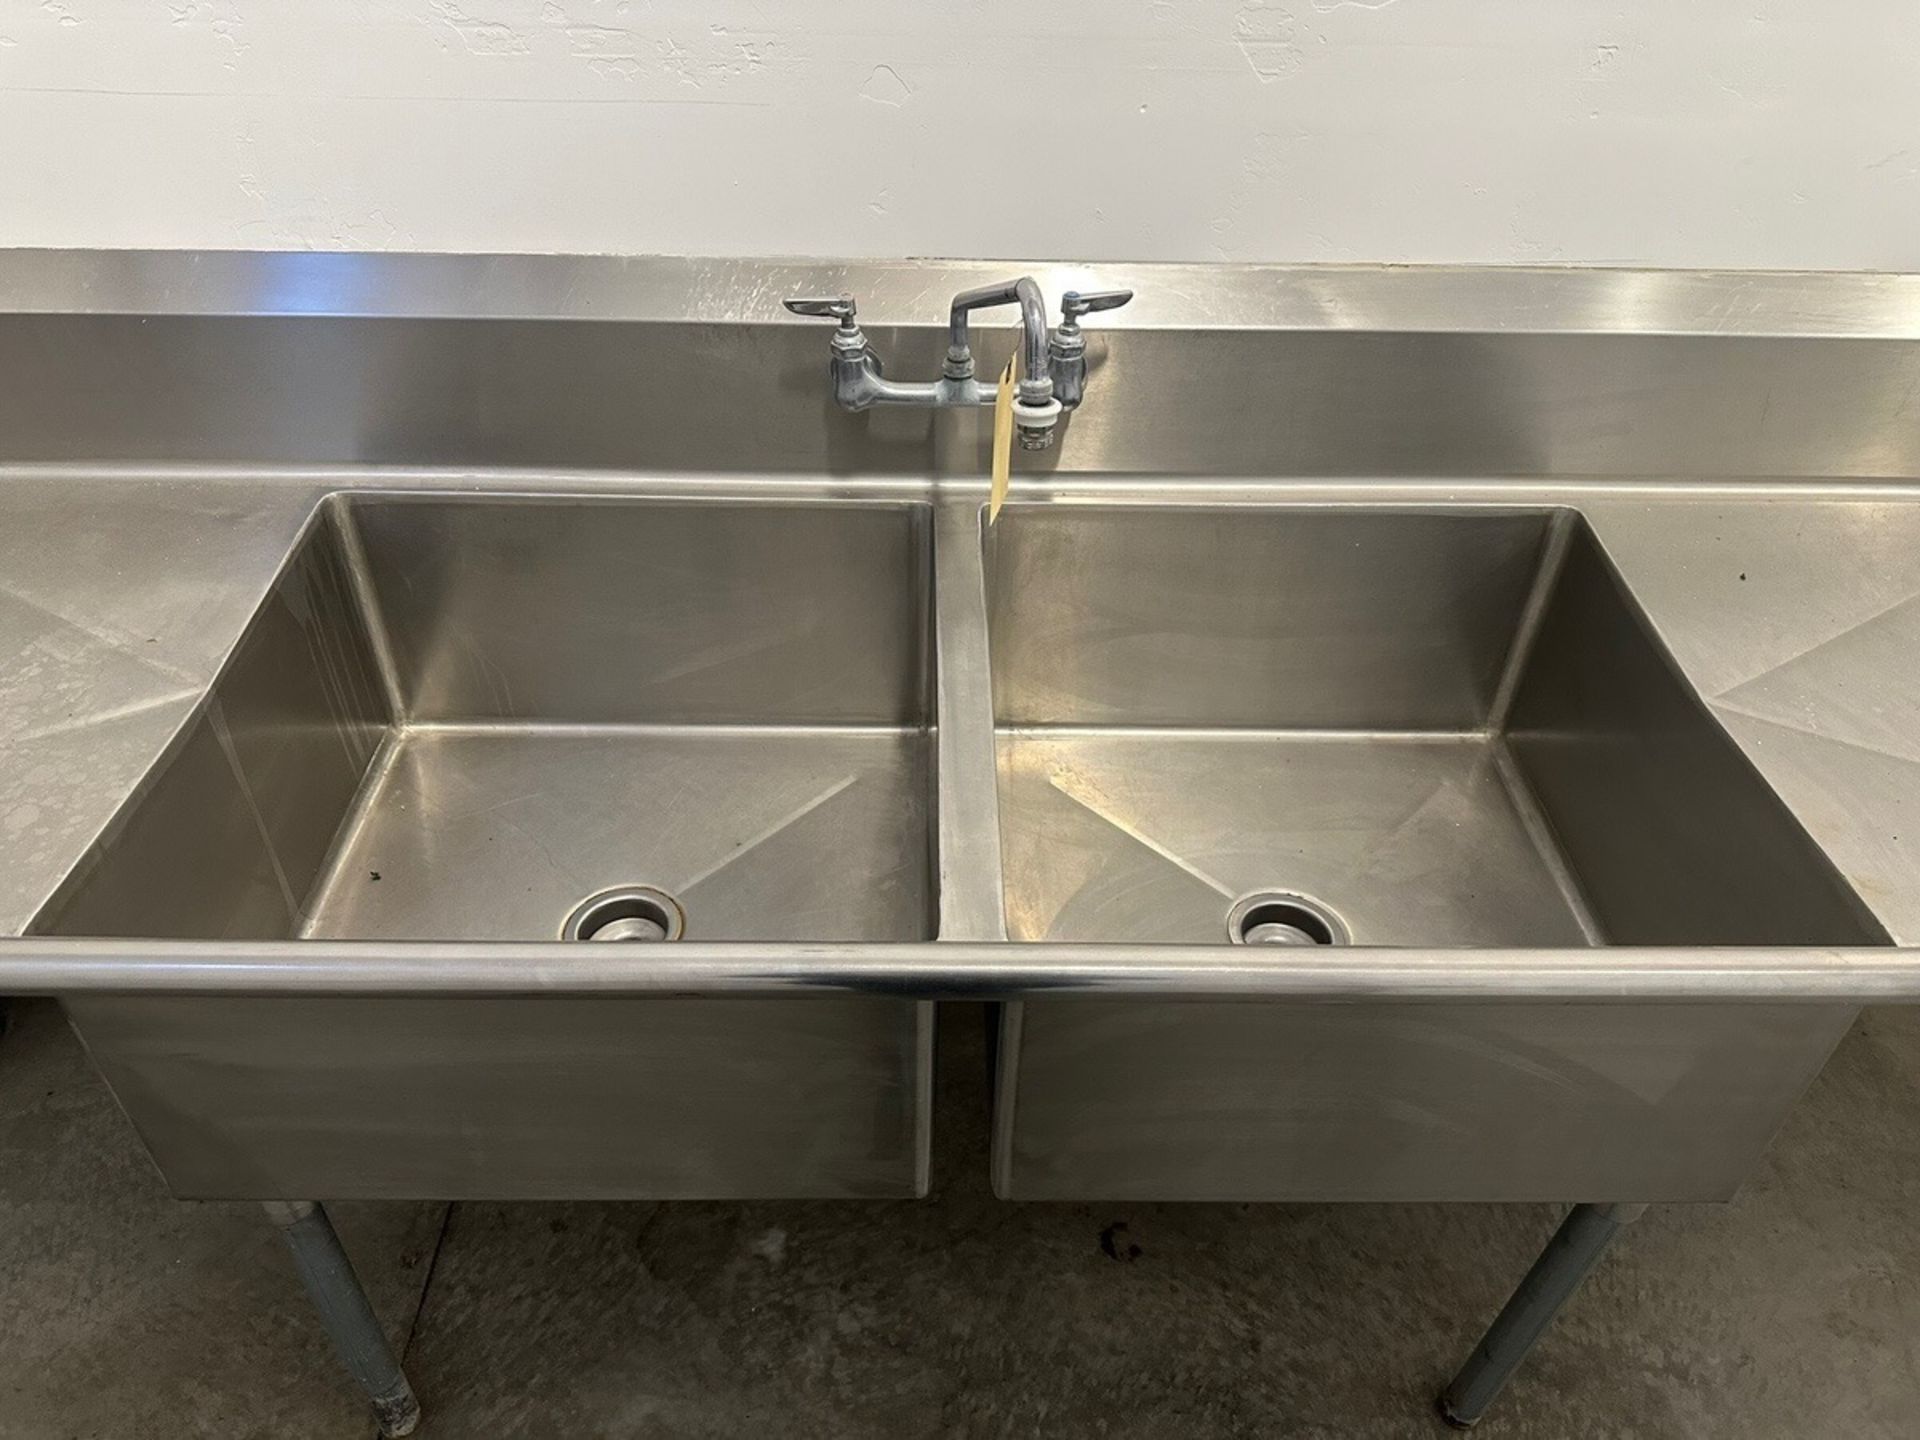 Stainless Steel 2 Basin Wash Sink | Rig Fee $125 - Image 2 of 3